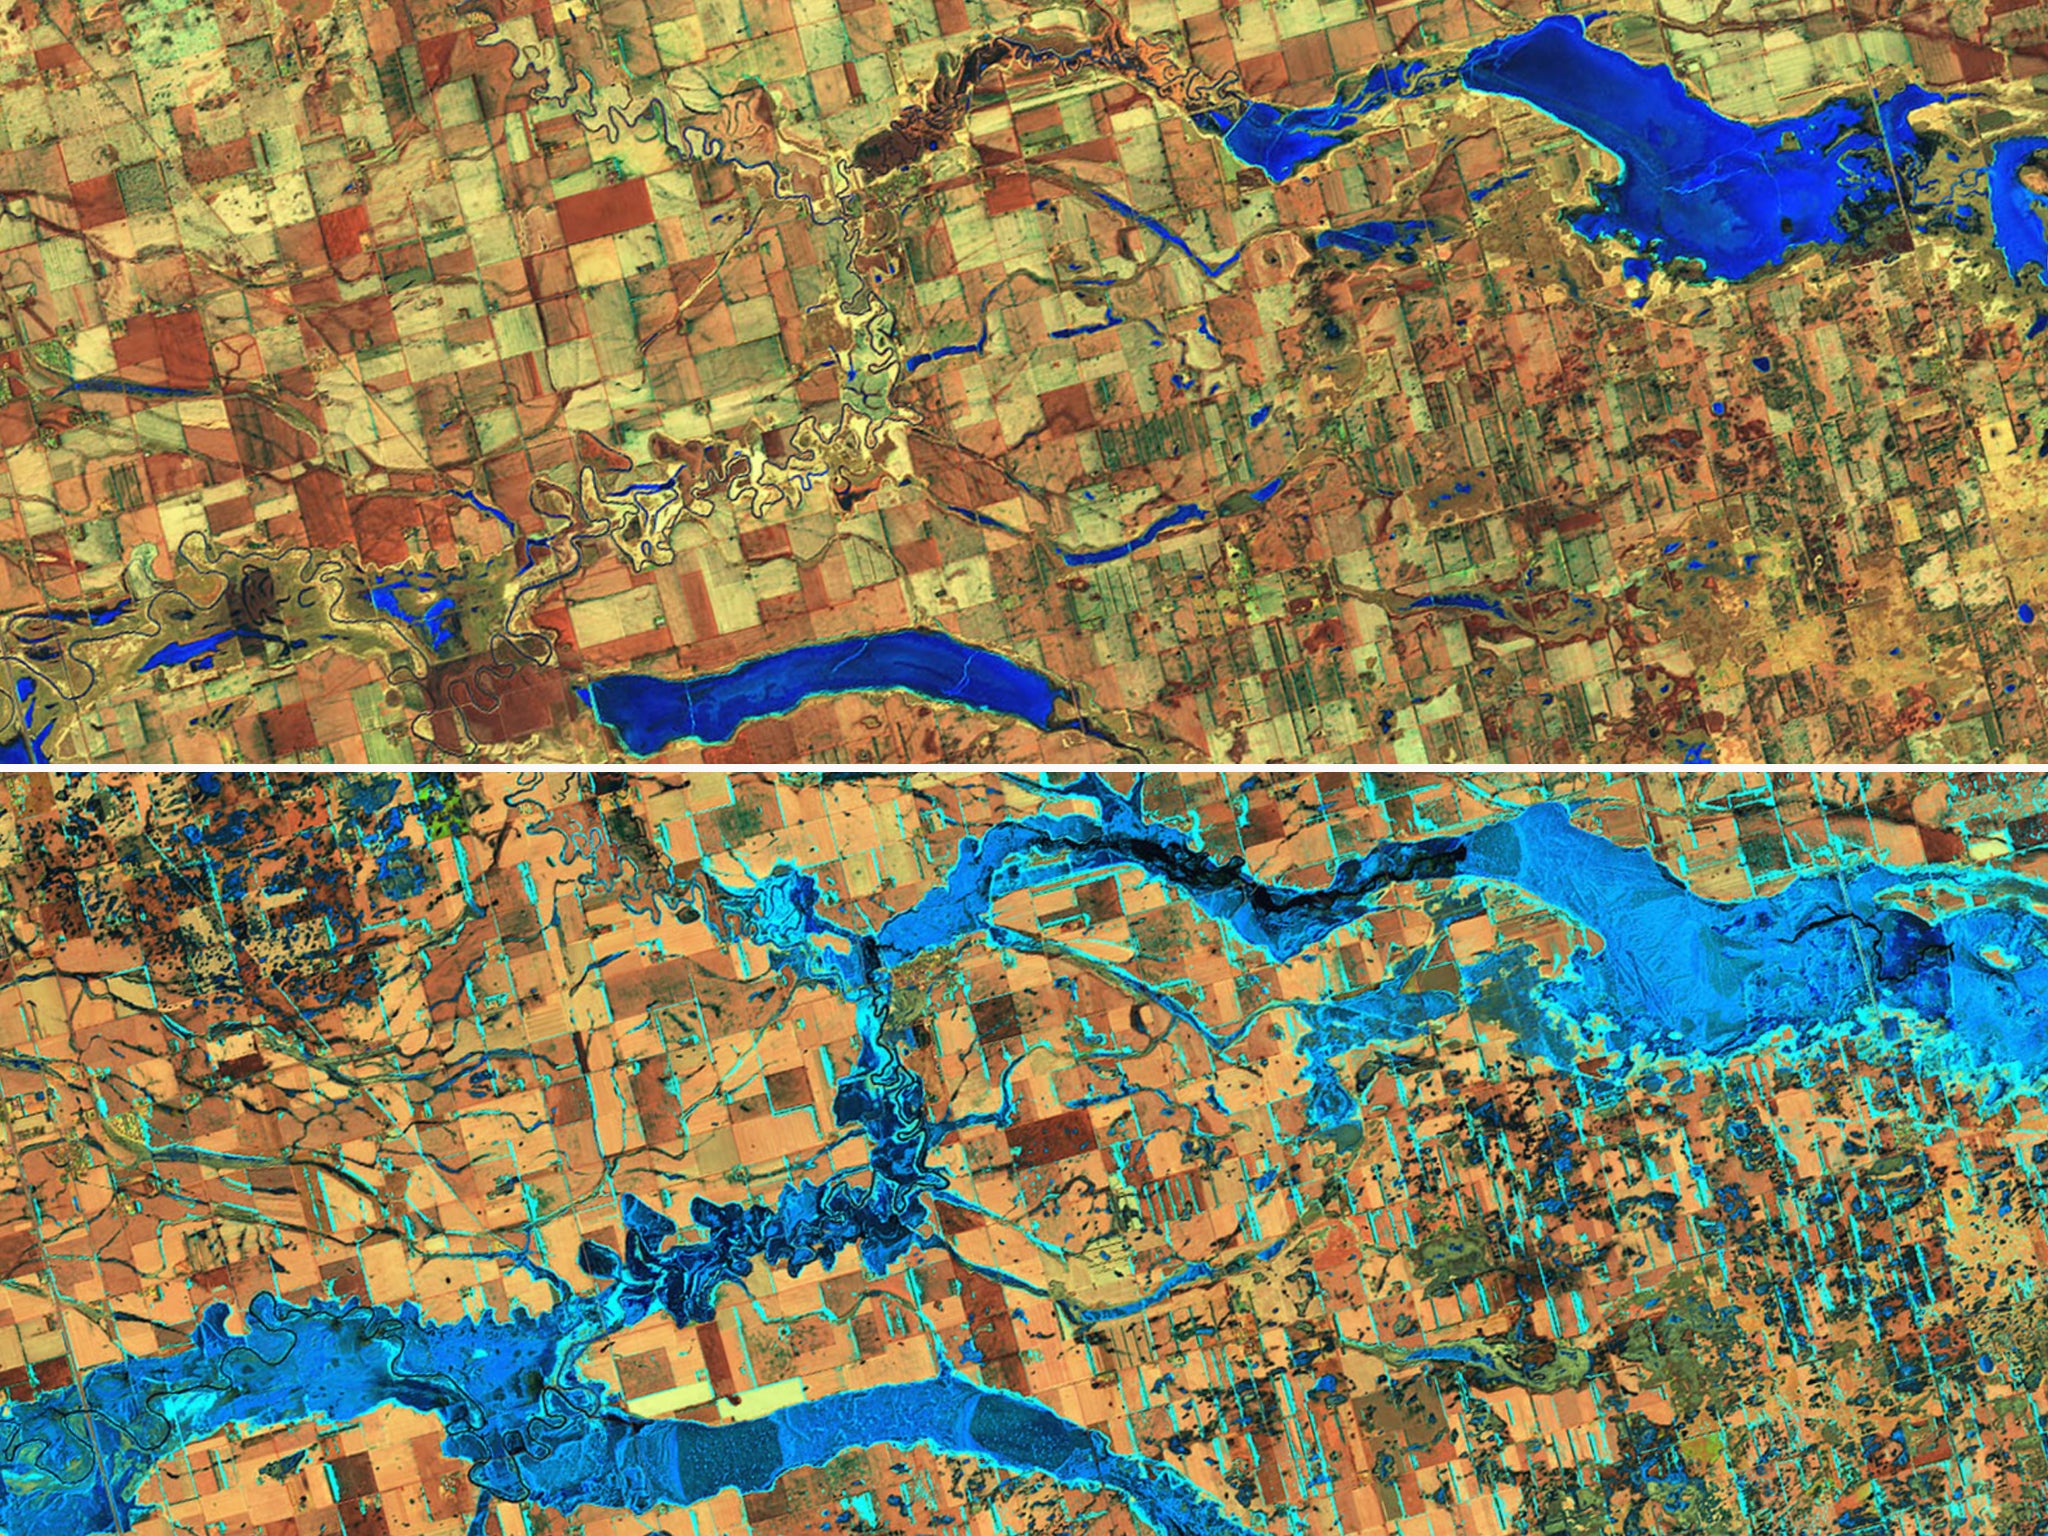 Colour-altered images show the extent of flooding on the James river in South Dakota